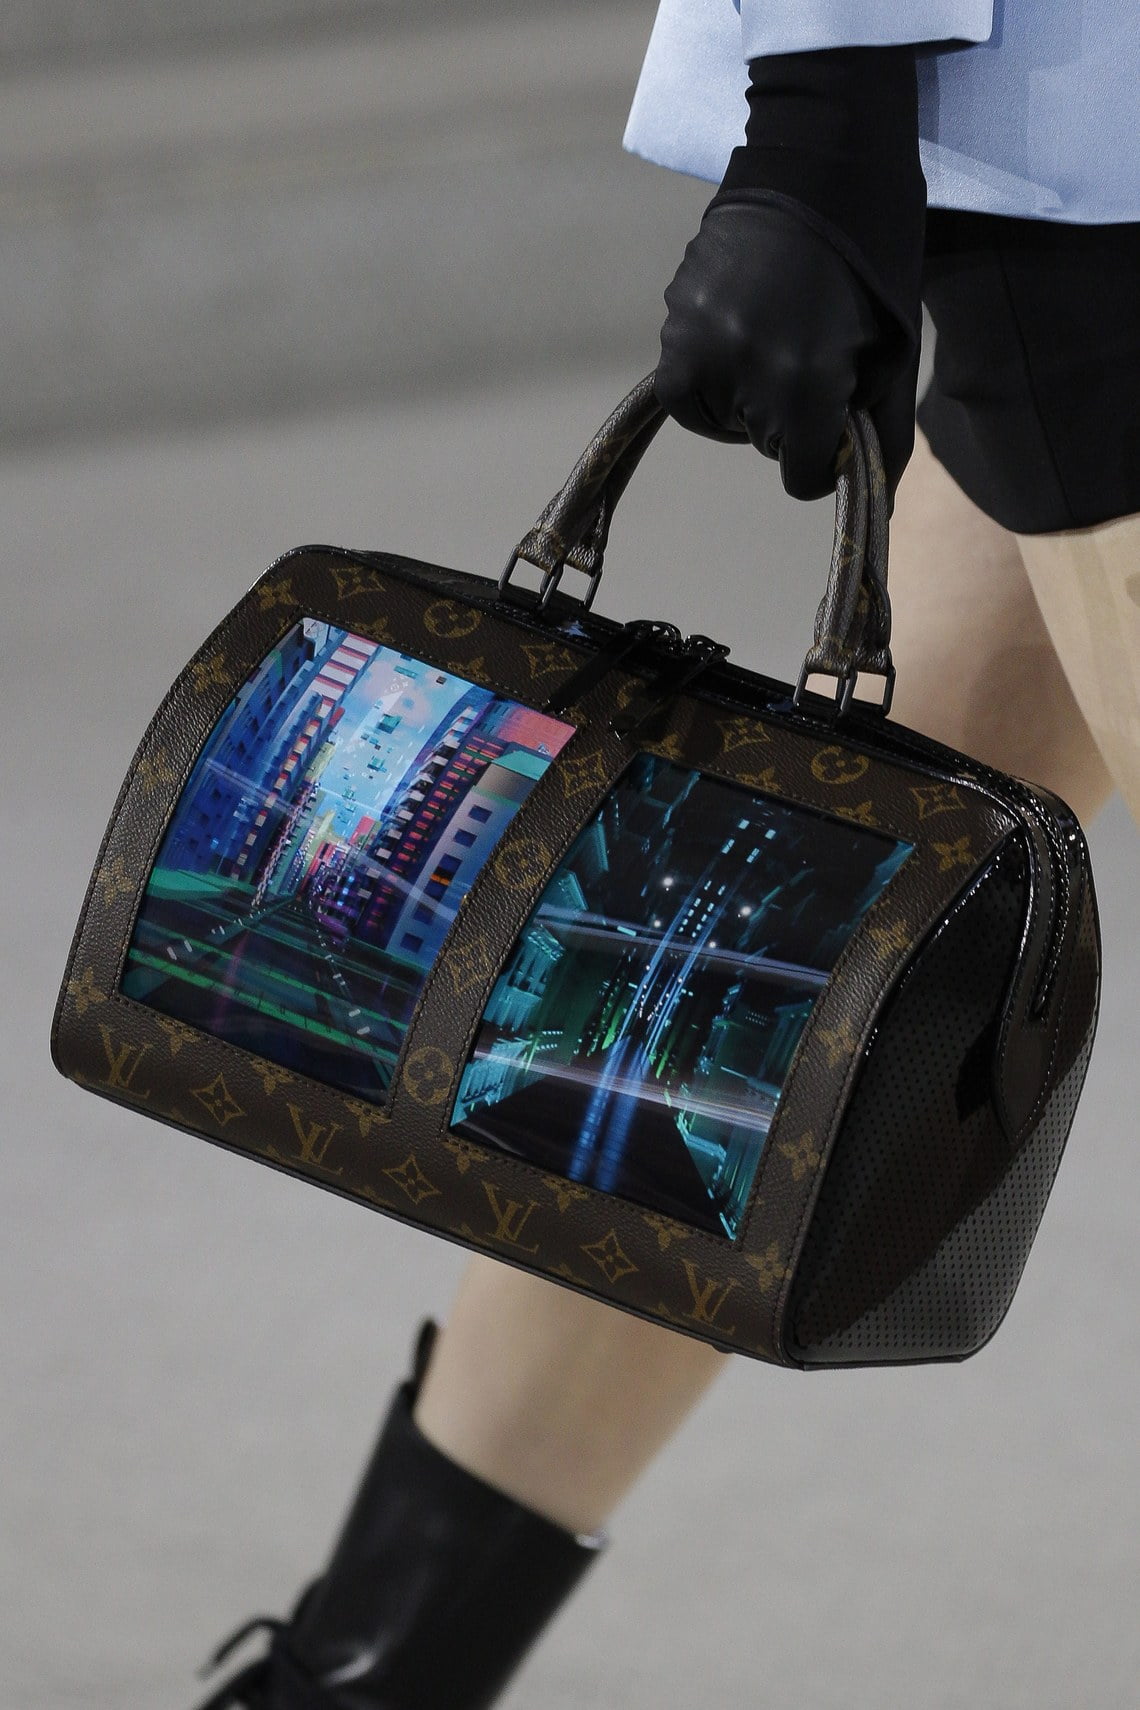 Most Expensive Lv Bag 2020 Ever